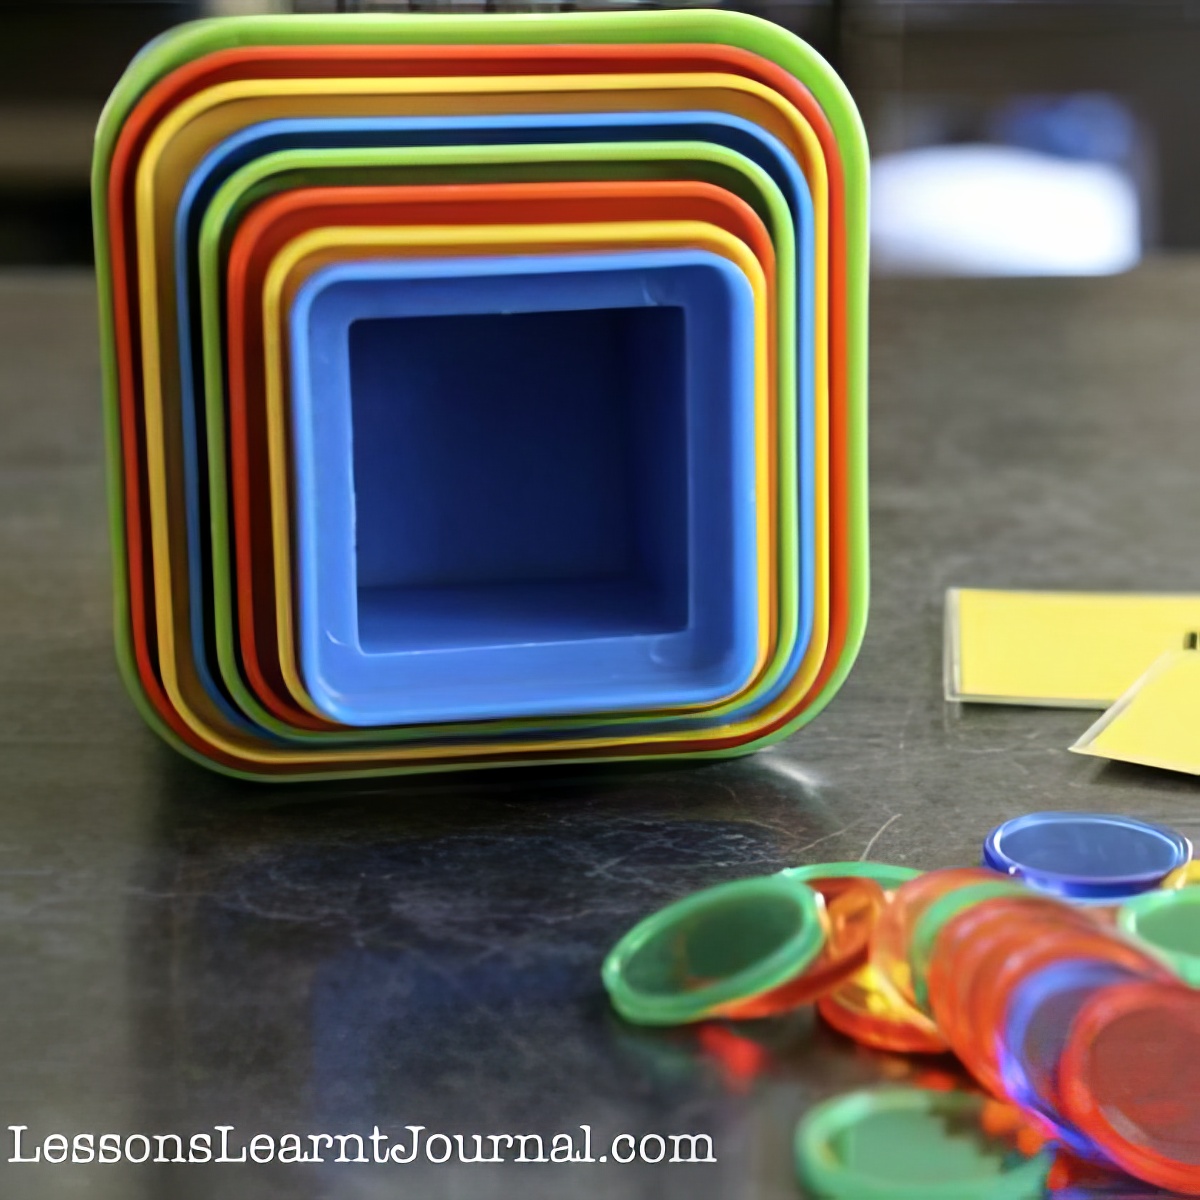 Math-Games-Counting-Box-Play-LessonsLearntJournal-01-650x433-1